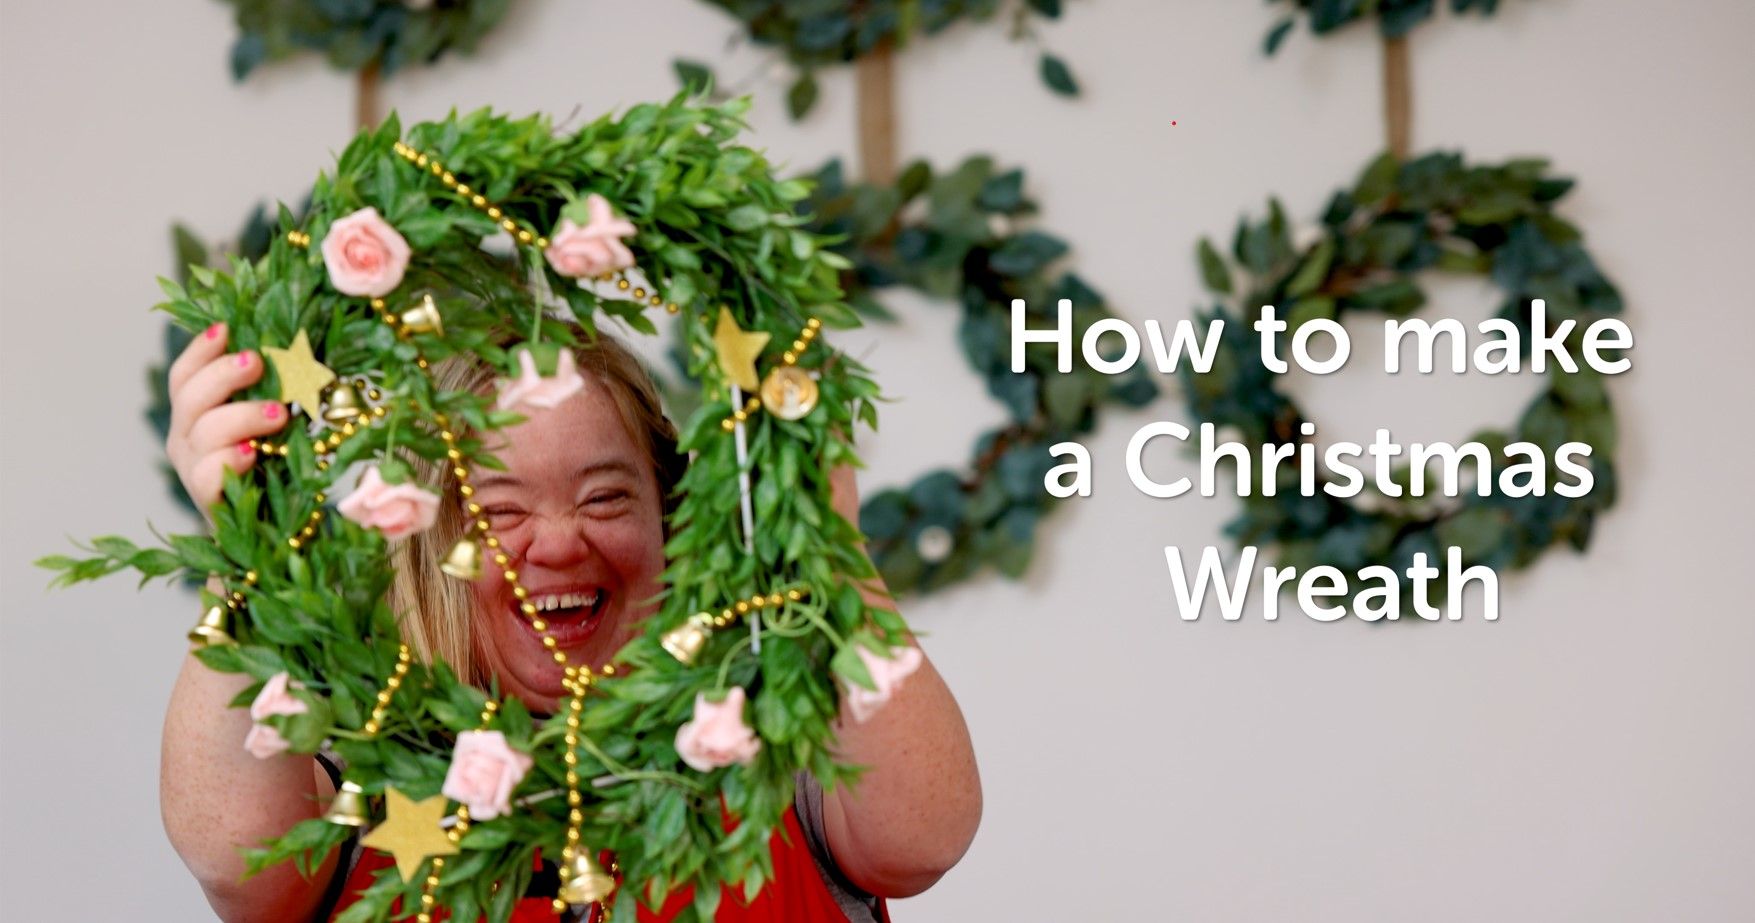 How to Make a Christmas Wreath by Jane